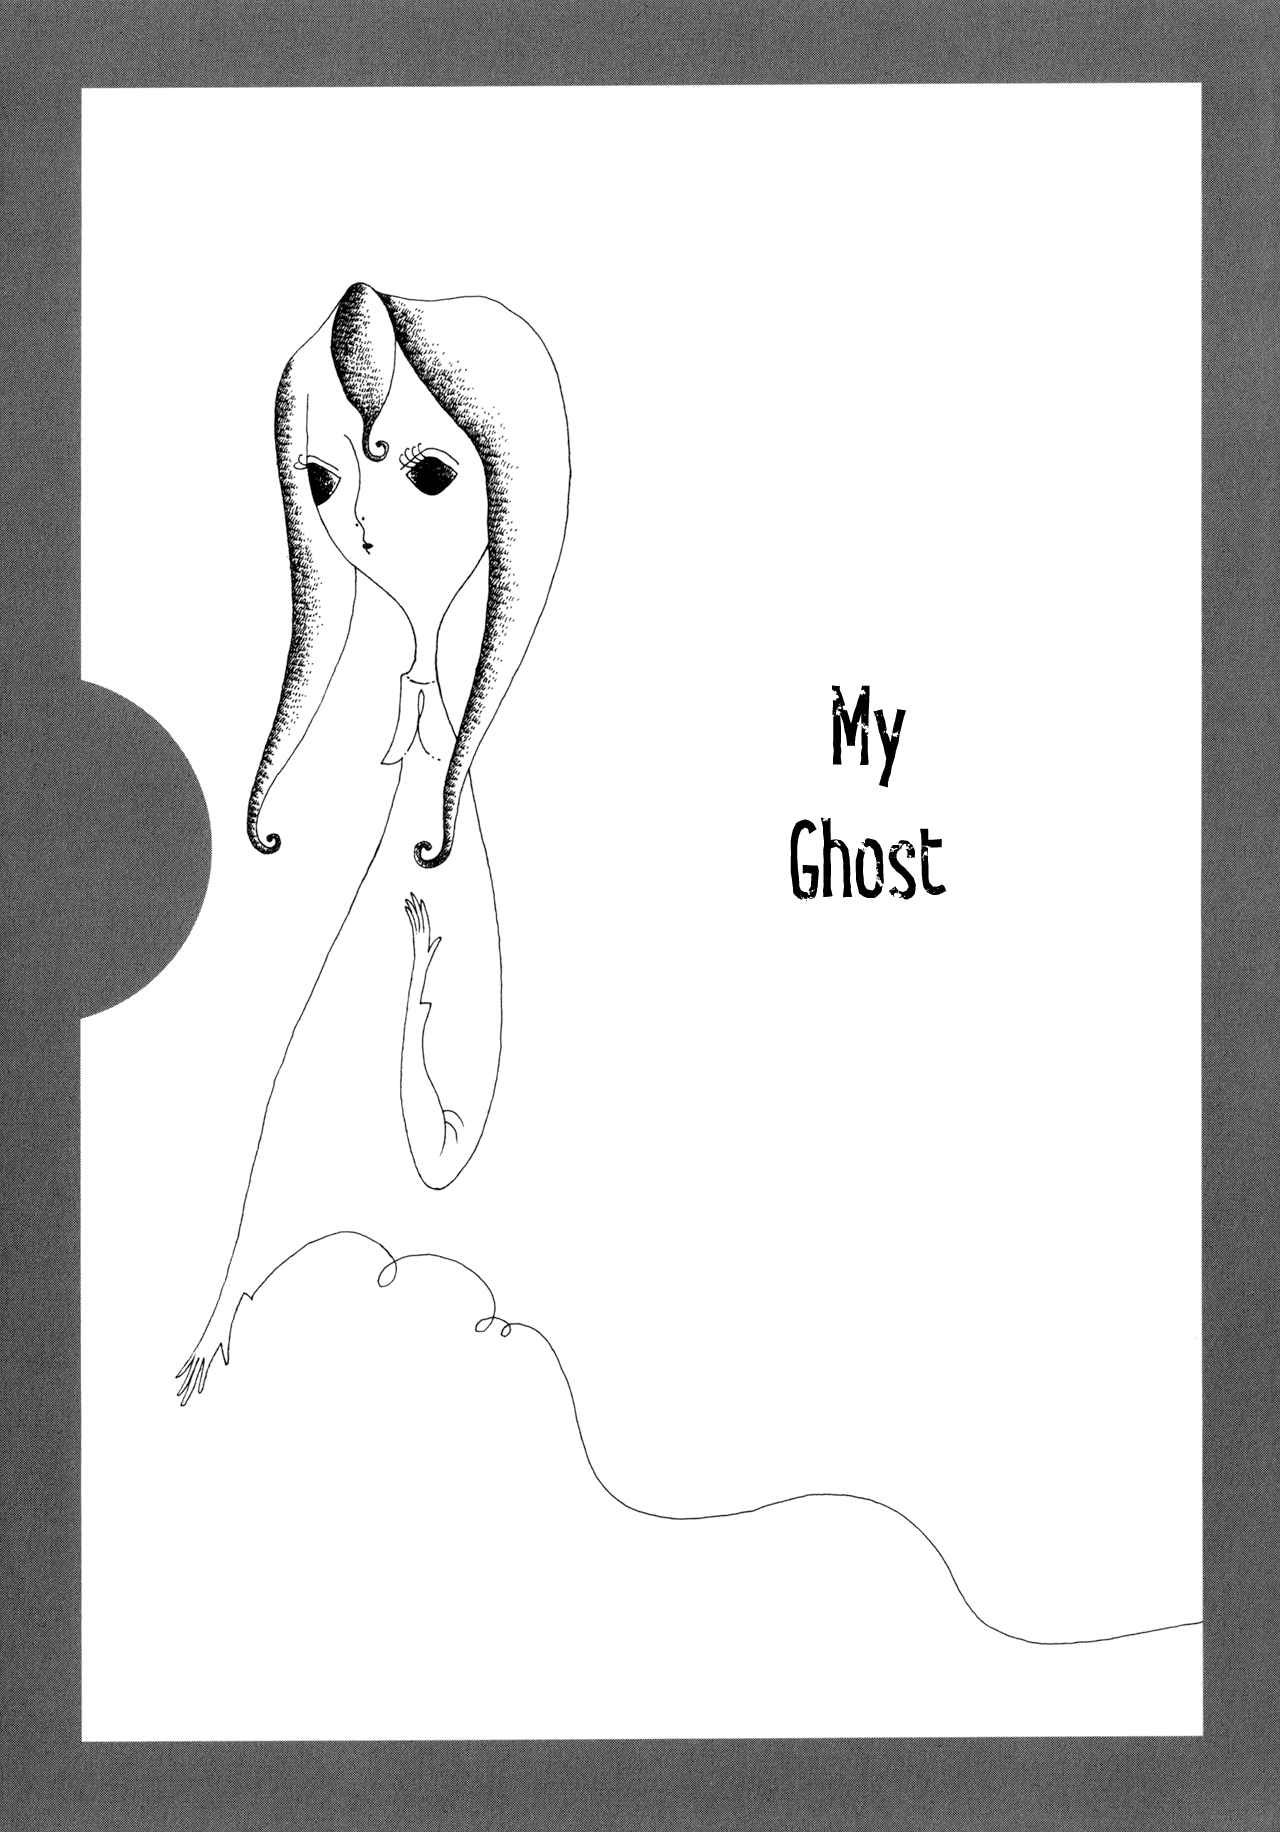 Sadness of the Heart Ch. 8 My Ghost